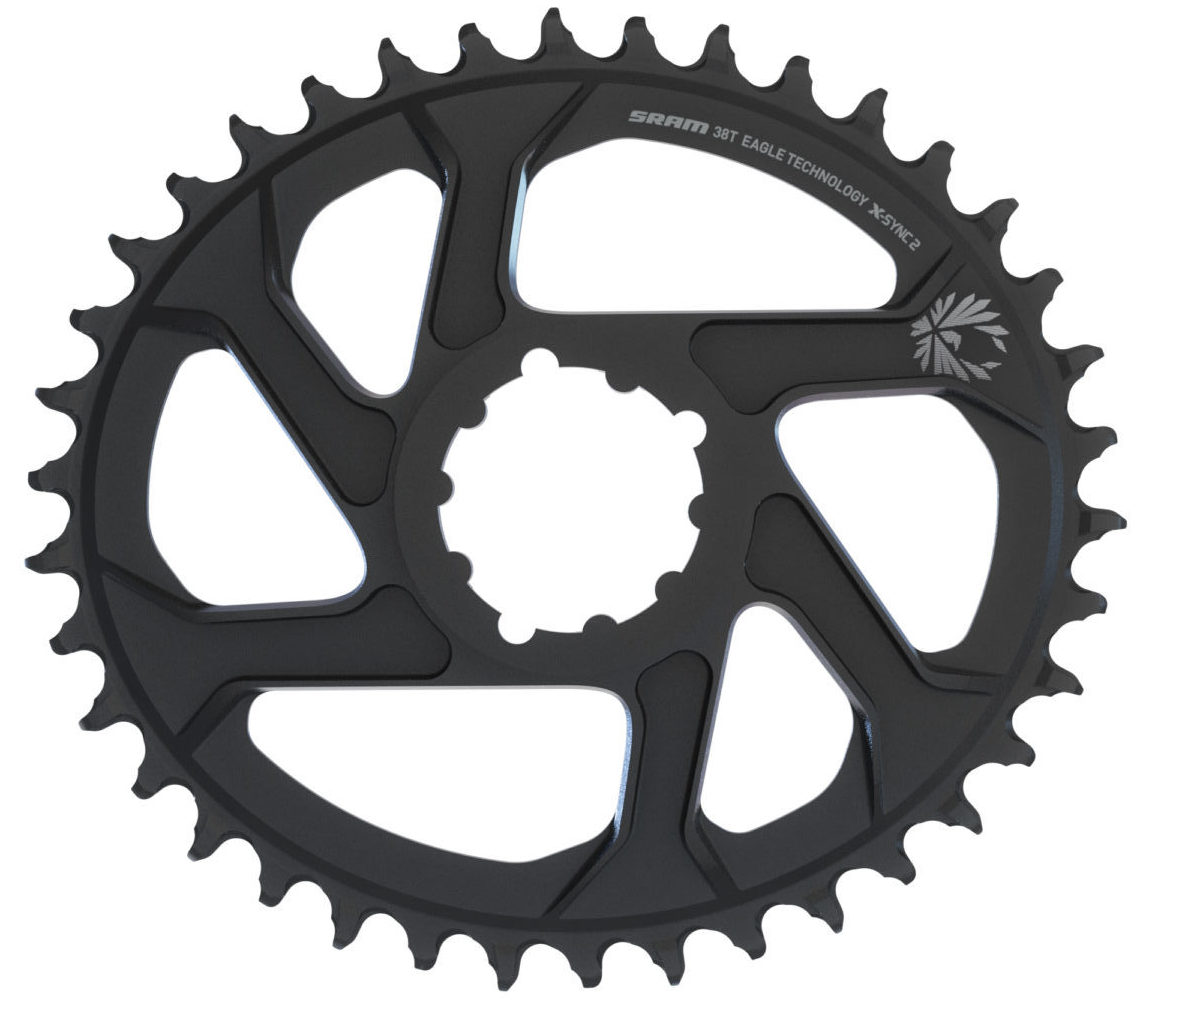 SRAM Eagle hatches genuine X-Sync 2 Oval chainrings